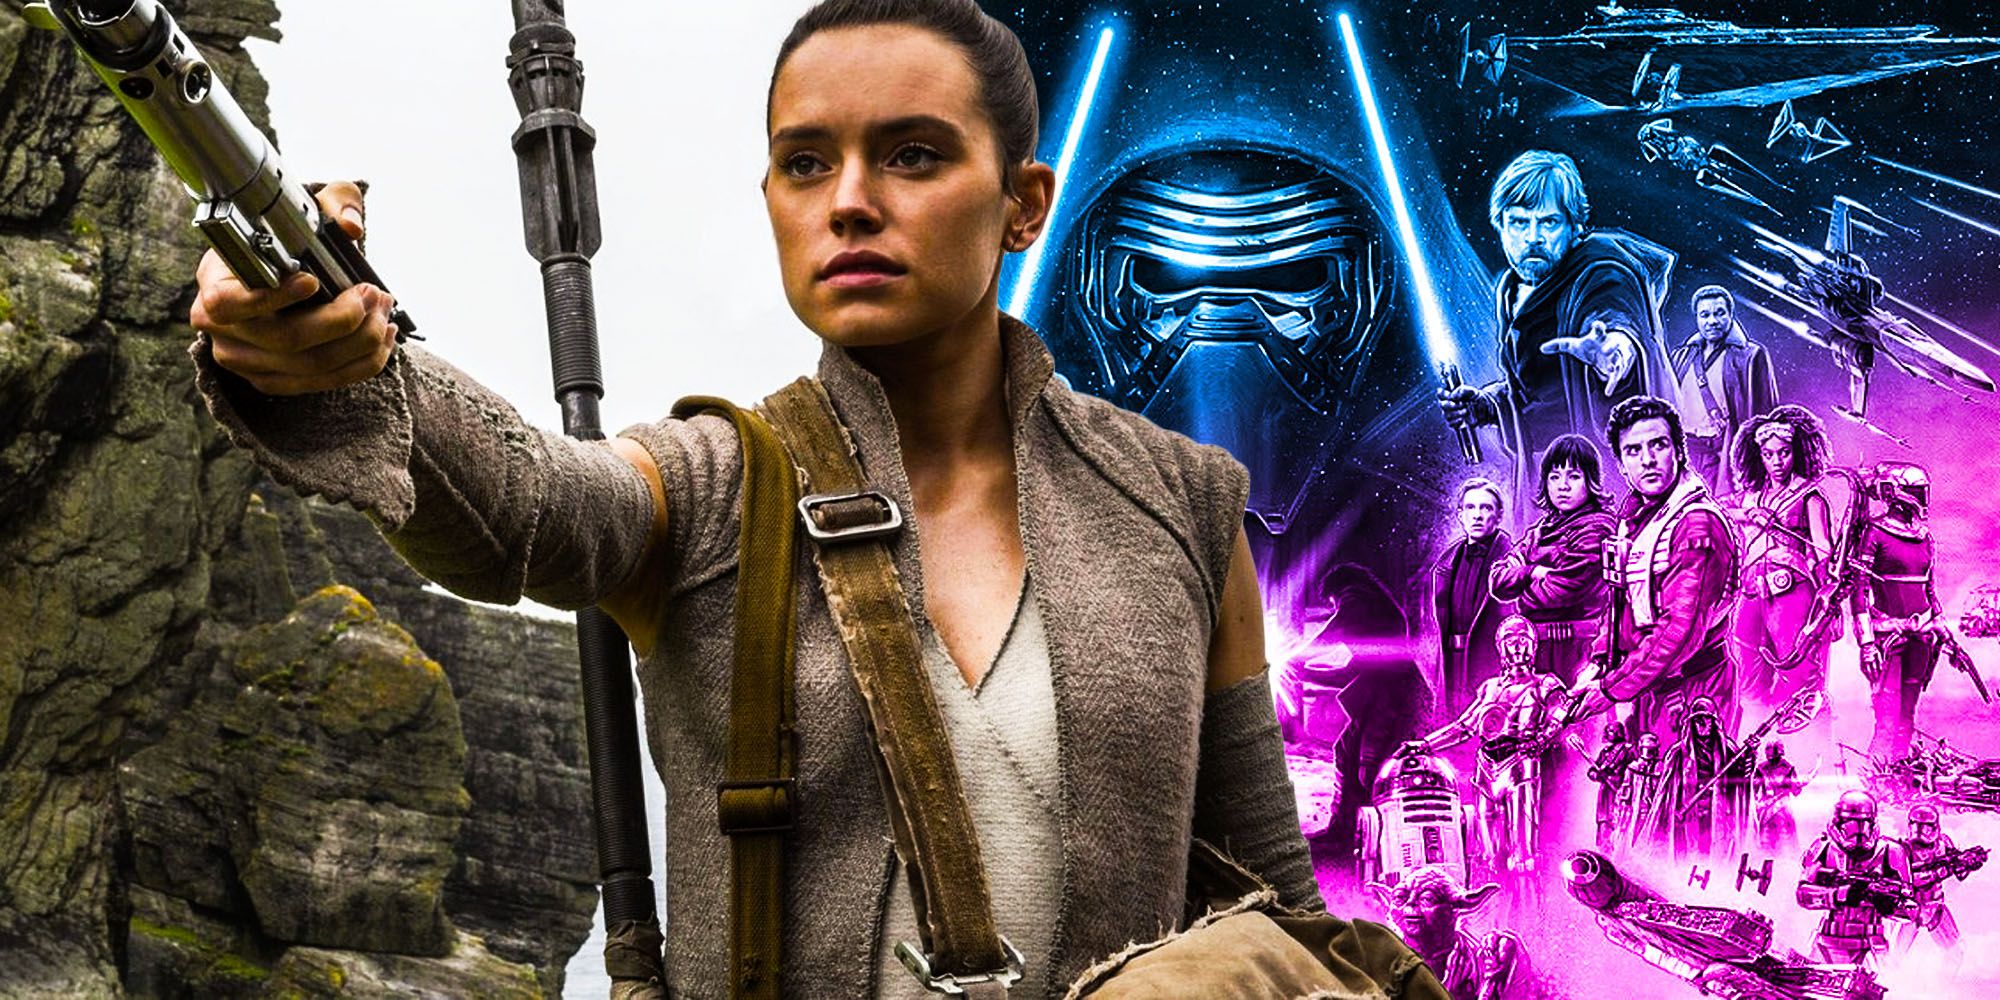 Star wars sequel trilogy focused on fixing things Rey